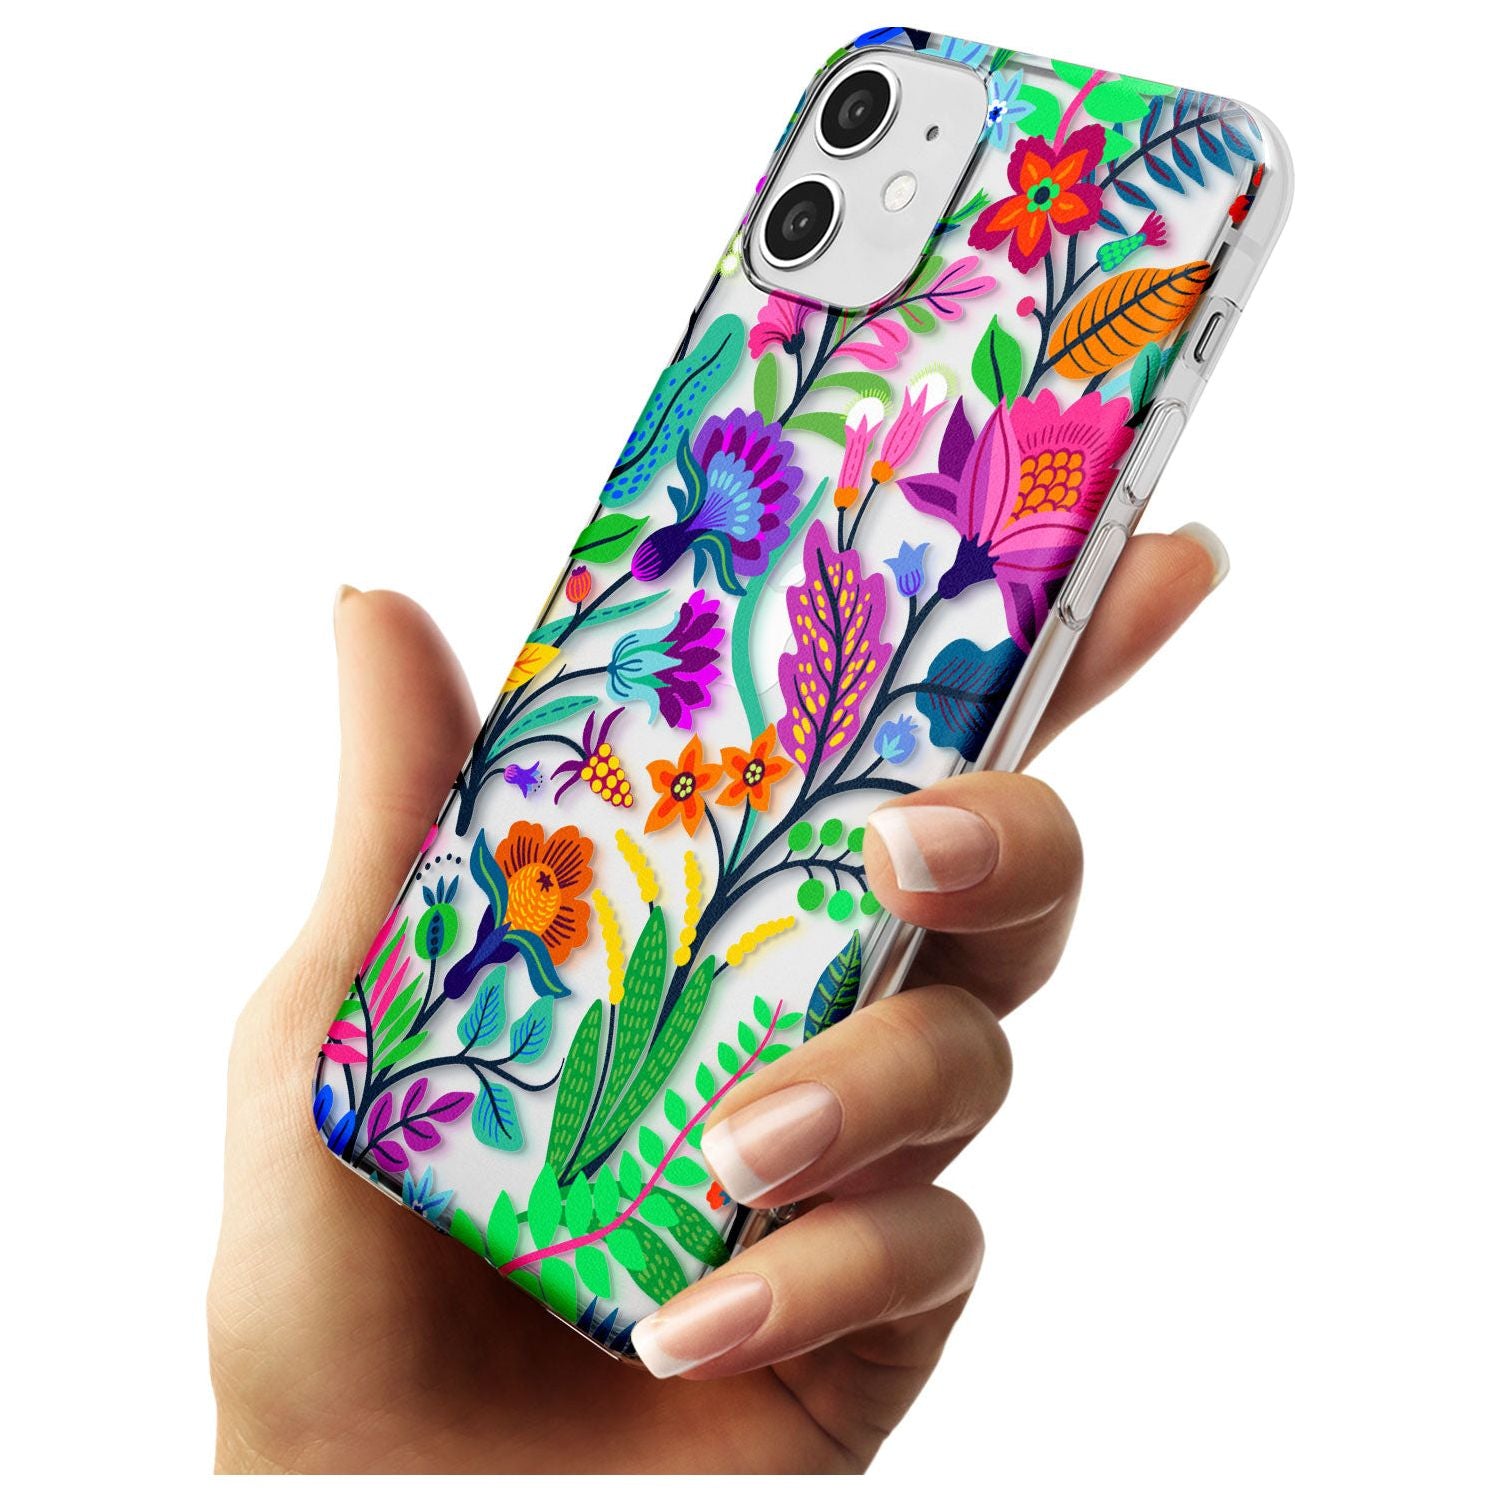 Floral Vibe Slim TPU Phone Case for iPhone 11